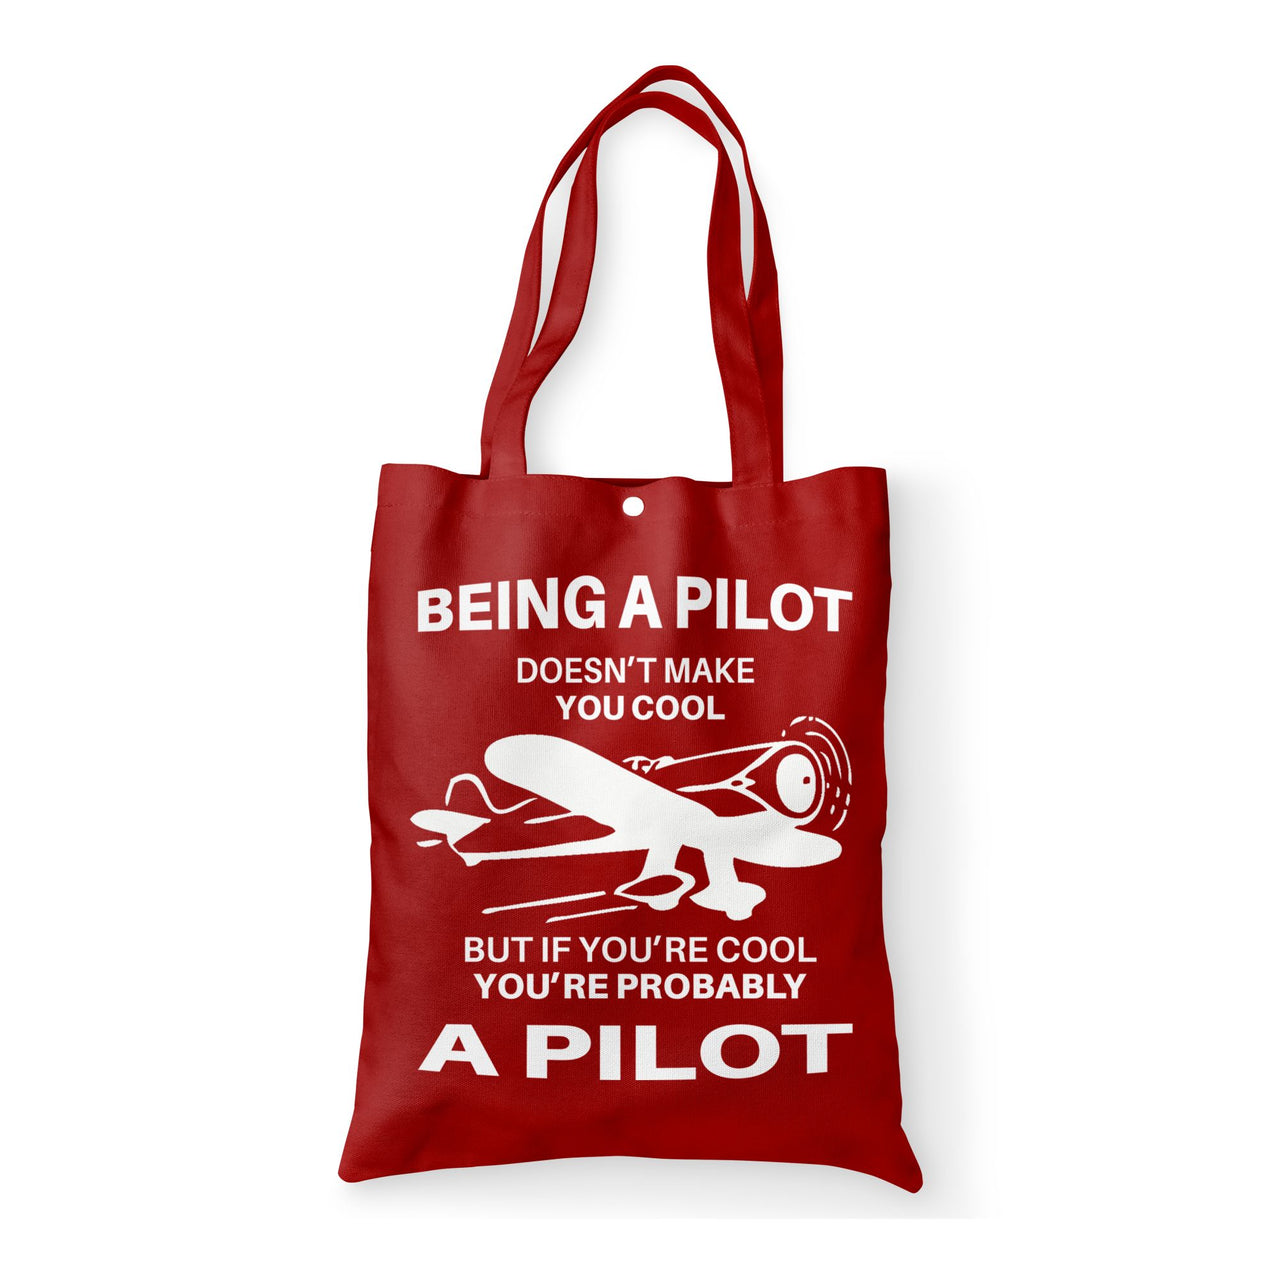 If You're Cool You're Probably a Pilot Designed Tote Bags